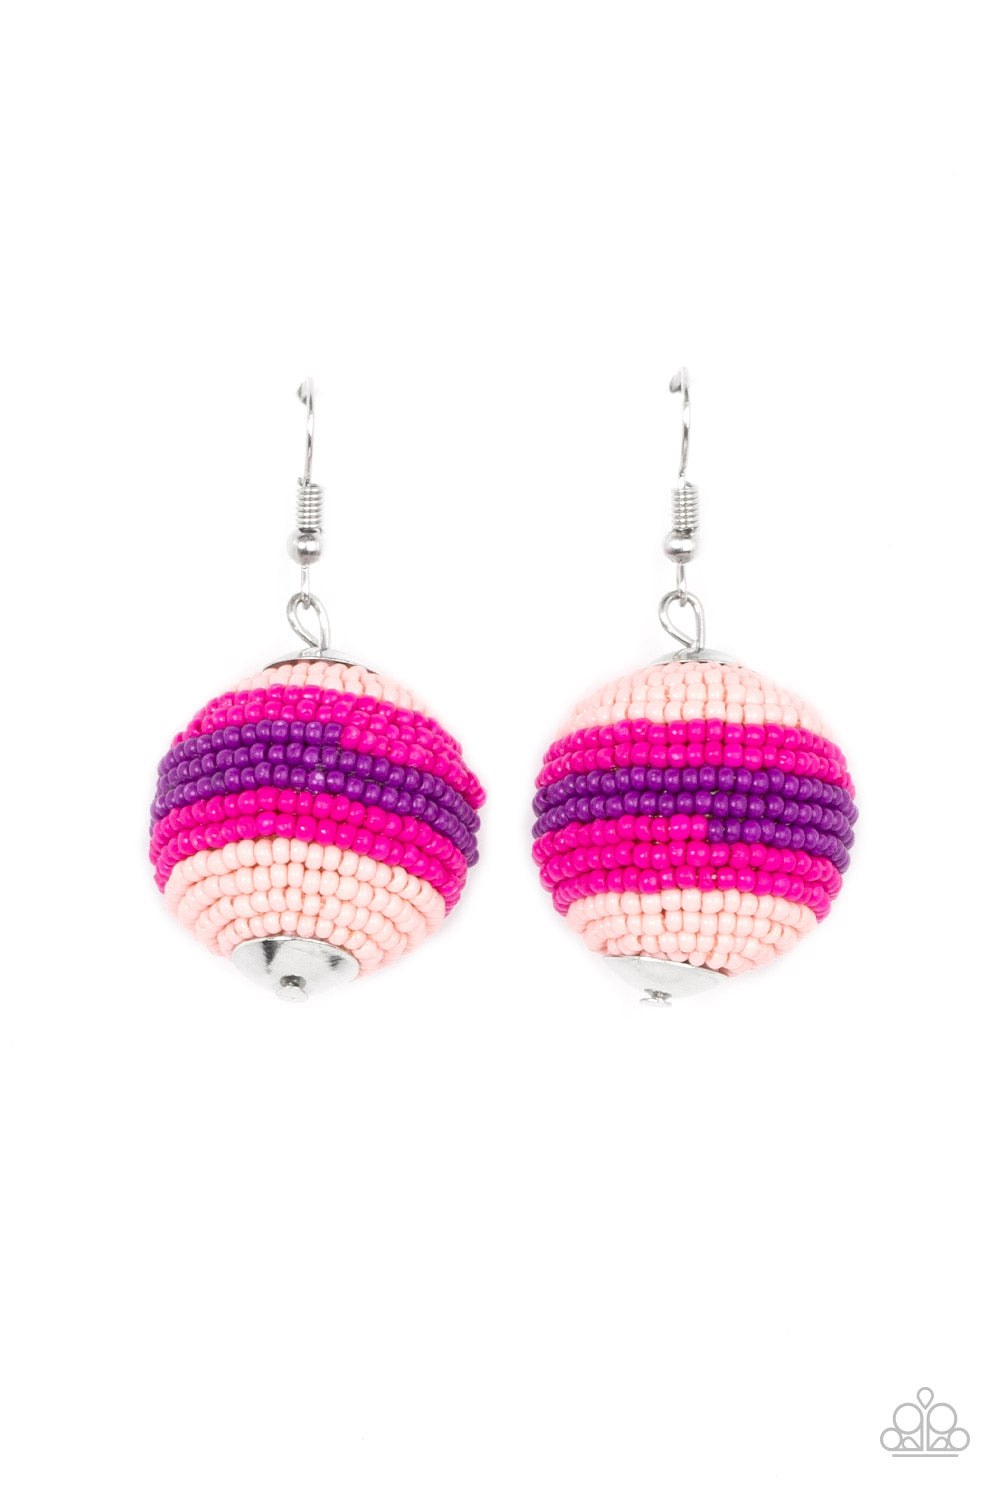 Paparazzi Zest Fest - Pink Seedbead Earrings strands of Pale Rosette, Fuchsia Fedora, and purple seed beads decoratively spin around a spherical frame, resulting in a colorful 3-dimensional display. Earring attaches to a standard fishhook fitting.  Sold as one pair of earrings.